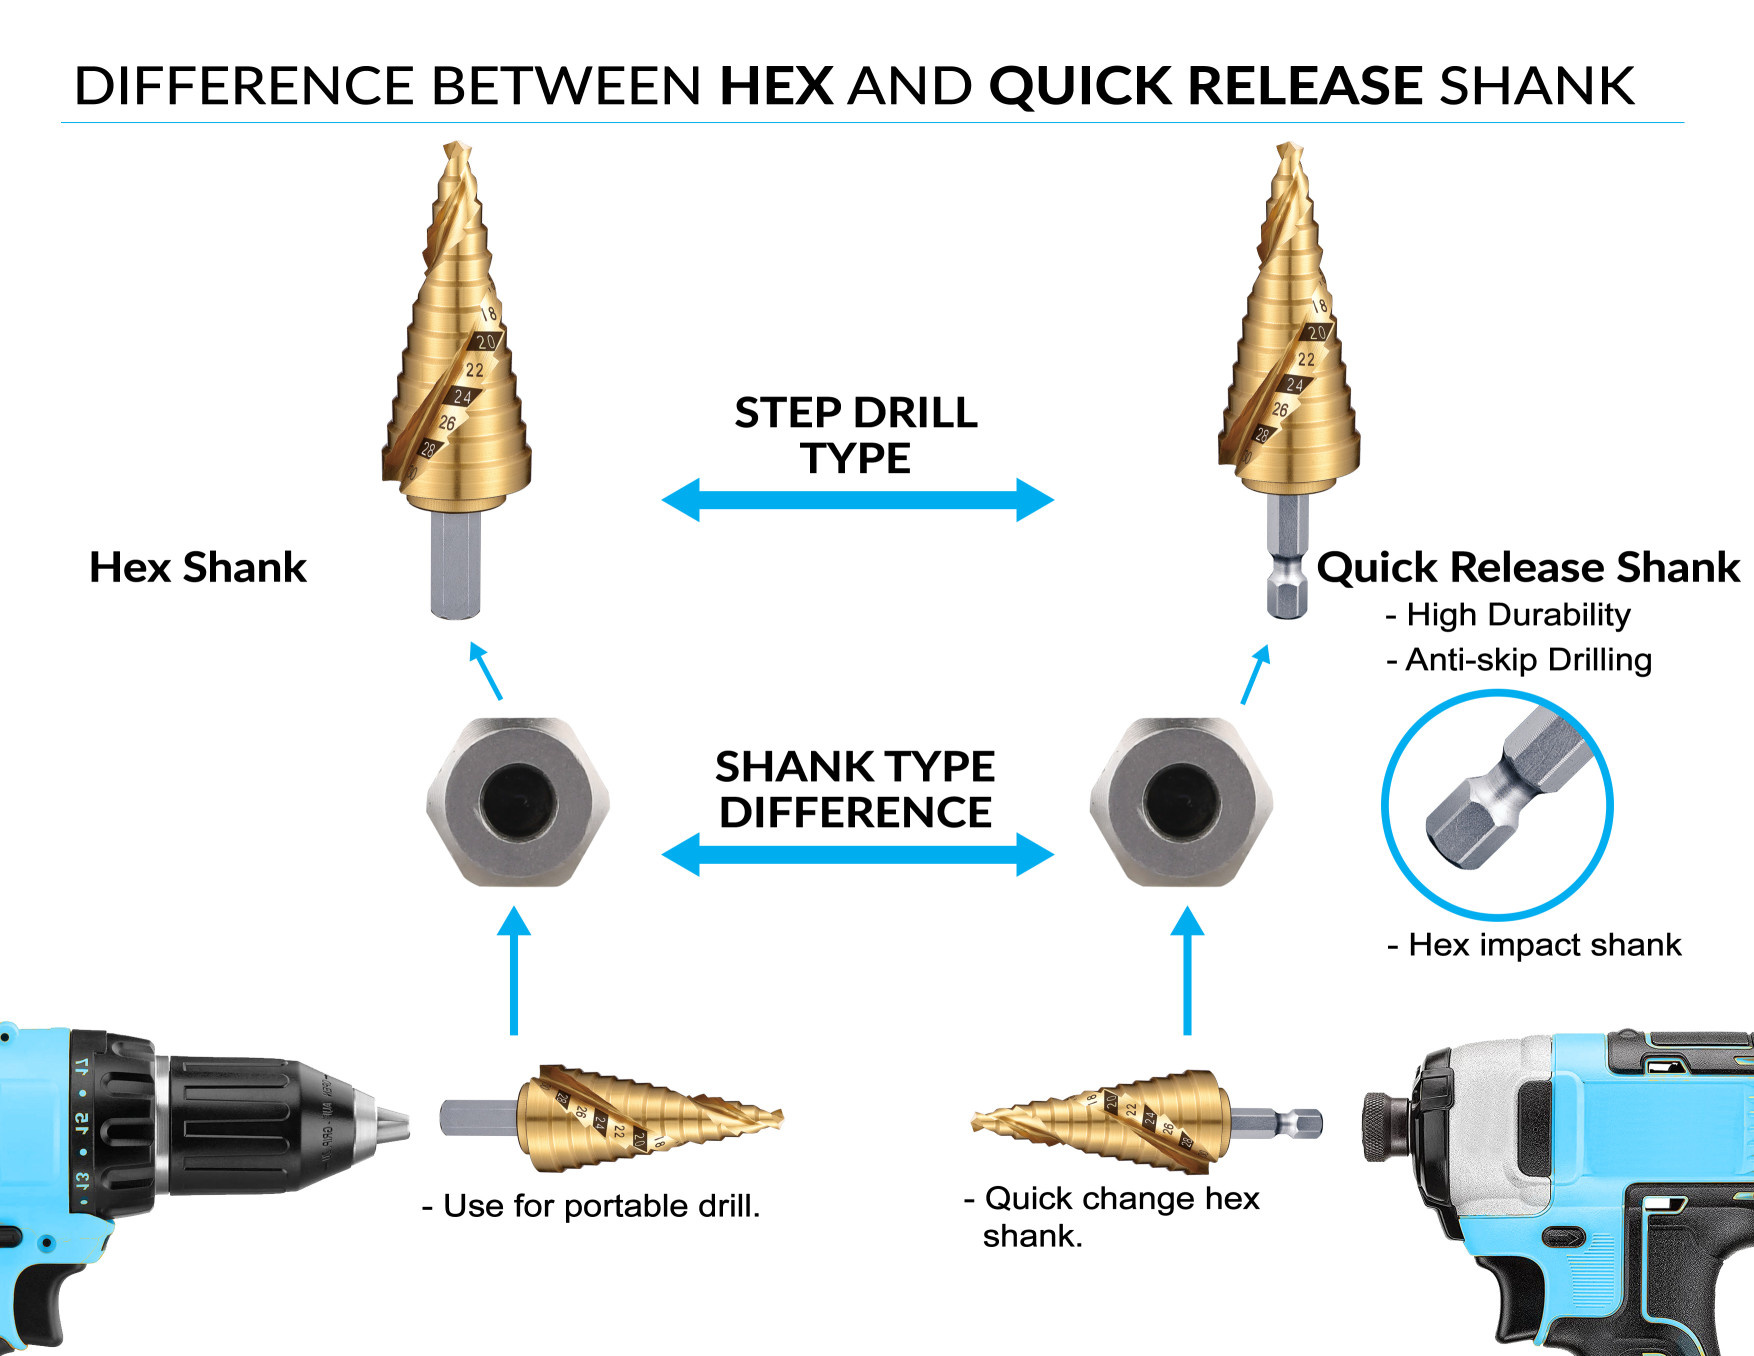 Stepdrill shank difference